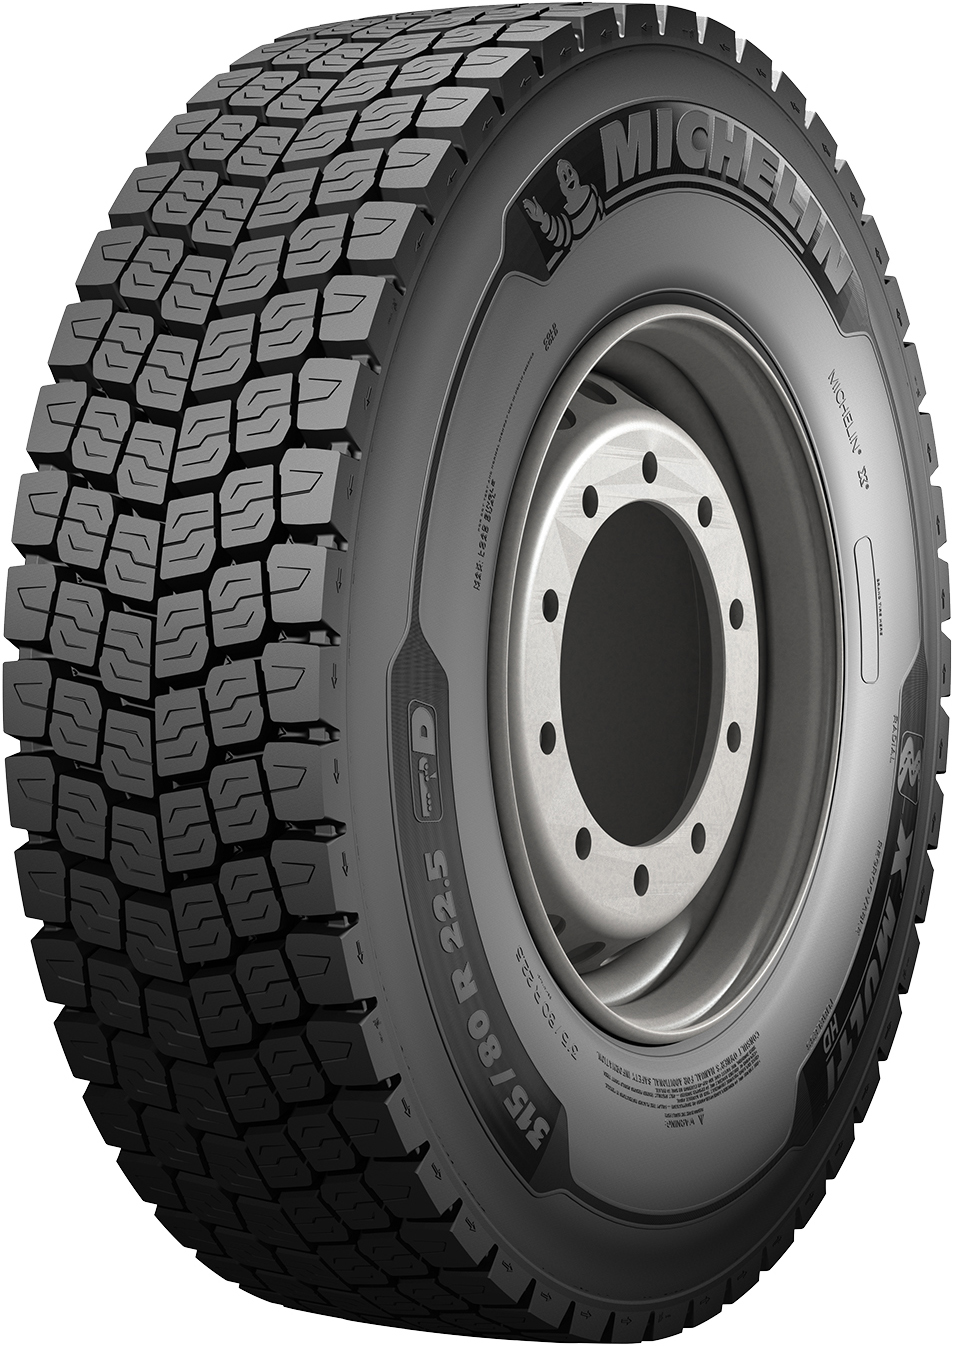 Anvelope camion MICHELIN XMULTIHDD 315/70 R22.5 154L